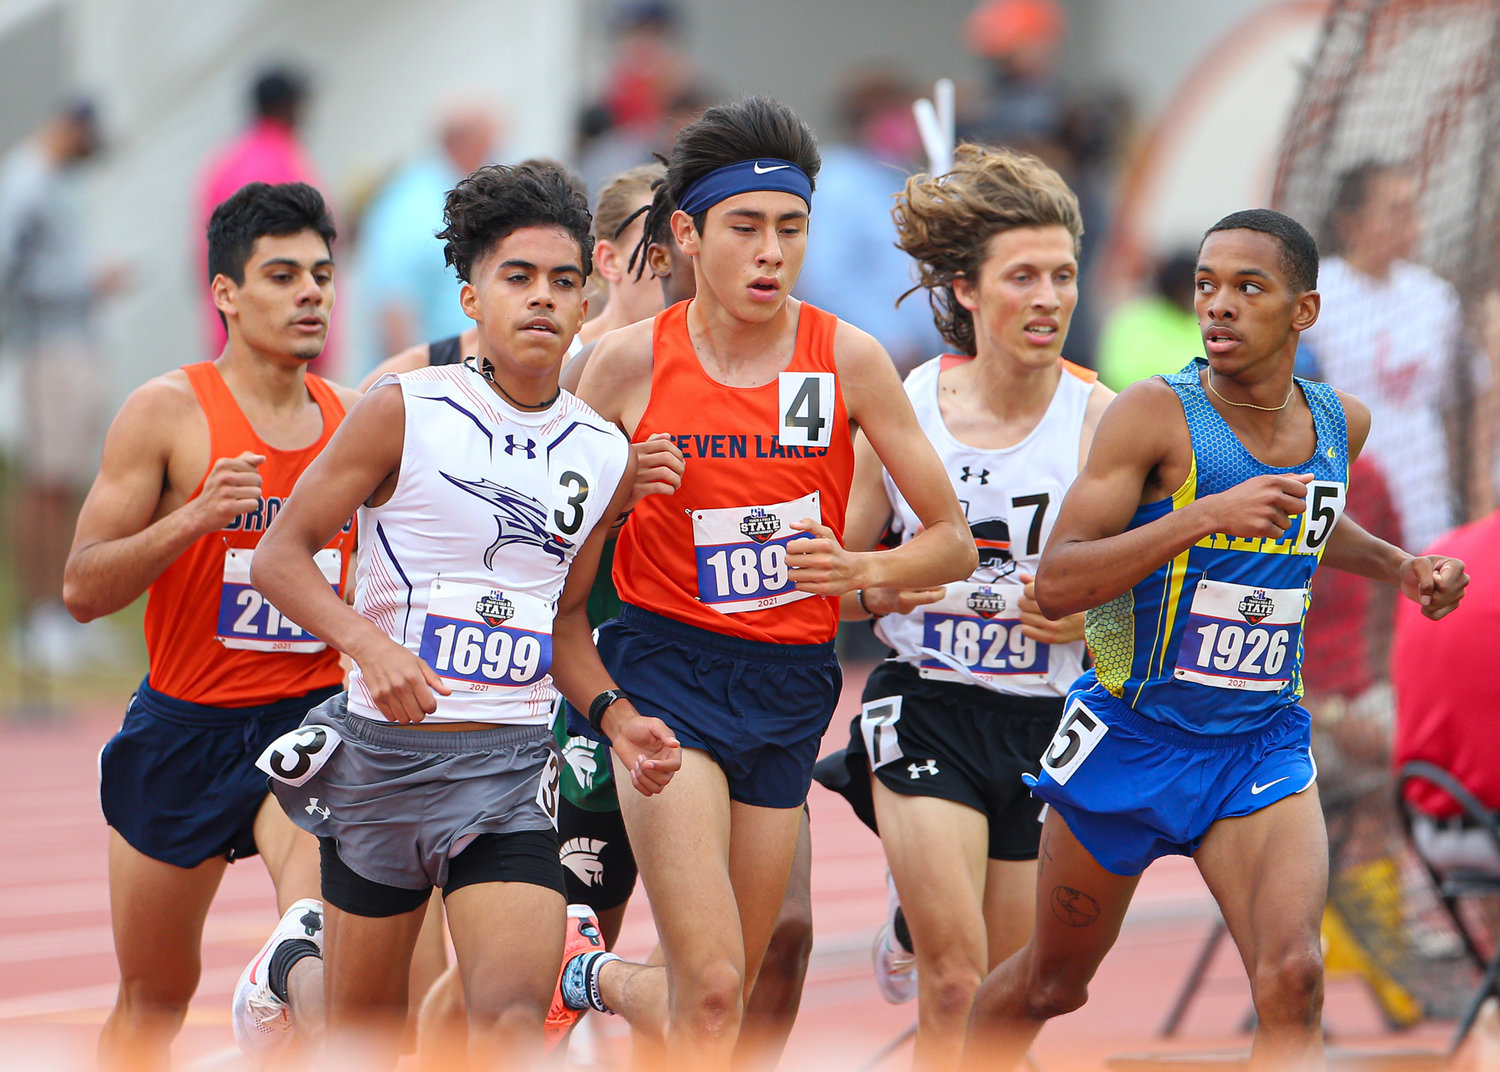 Ruben Rojas of Seven Lakes High School runs in the Class 6A boys 3200 meter run during the UIL State Track and Field Meet on May 8, 2021 at Mike A. Myers Stadium in Austin, Texas. Rojas finished seventh in the event.